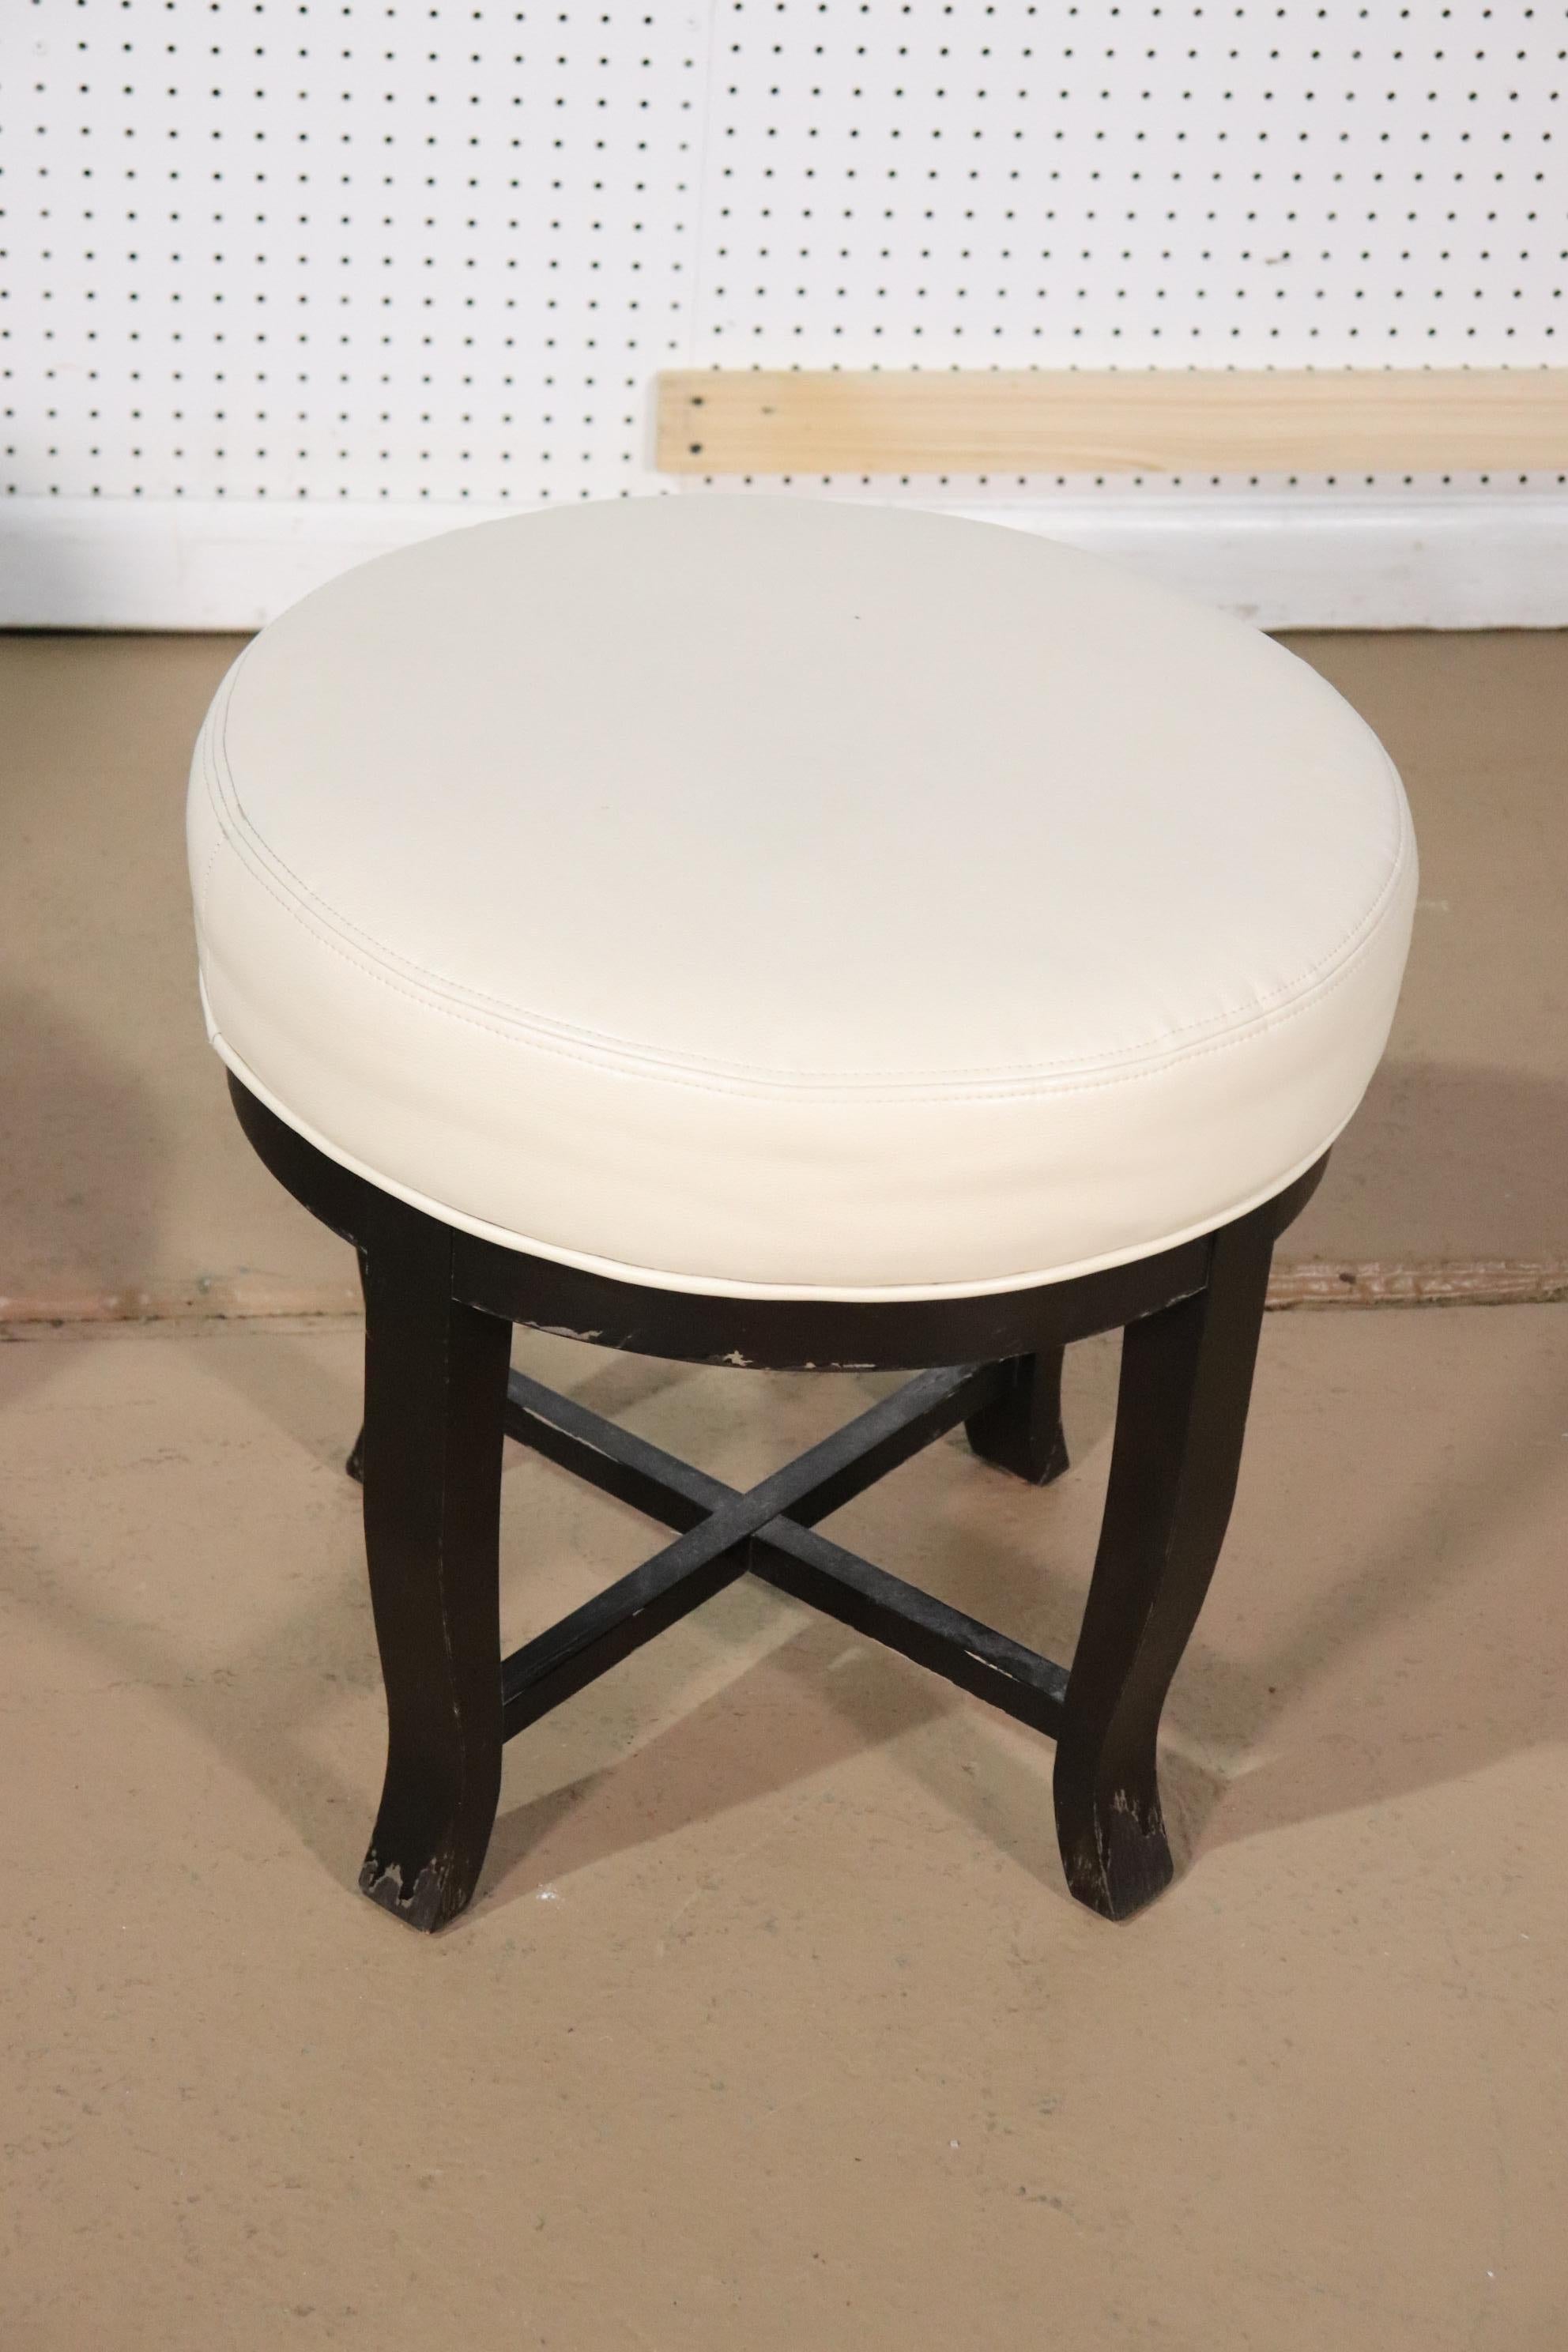 This is a nice pair of stools that can be gilded, painted or left as they are. They have a contemporary design and nice white leather seating surfaces. The stools measure 20 x 20 x 20 tall.